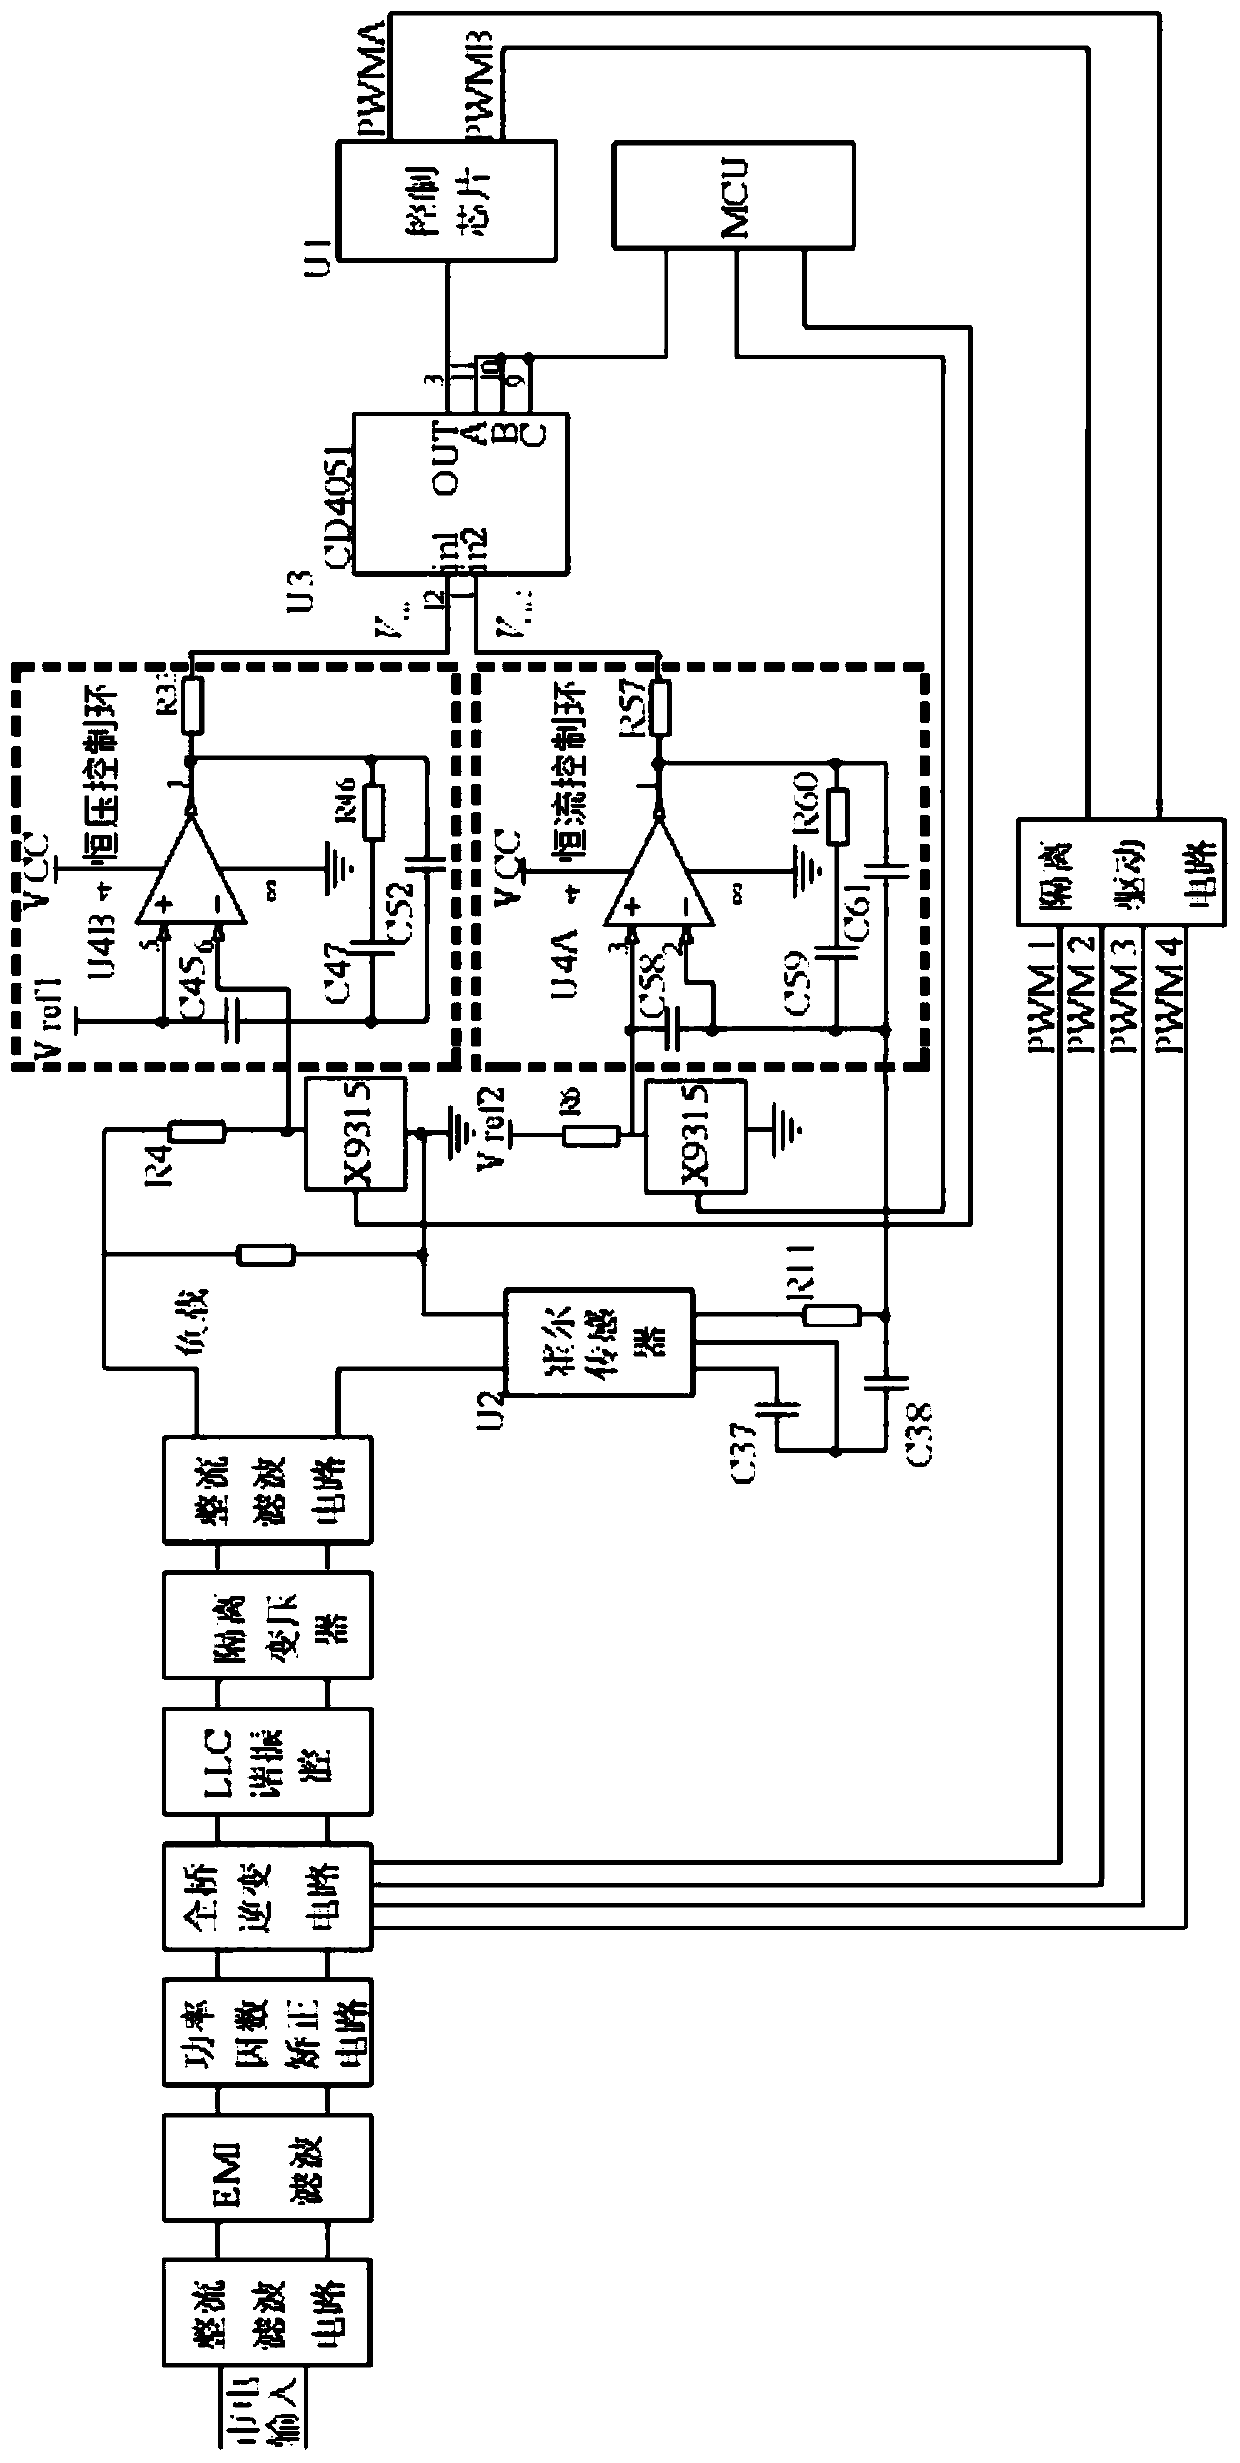 Multi-output mode conversion control circuit of switching power supply